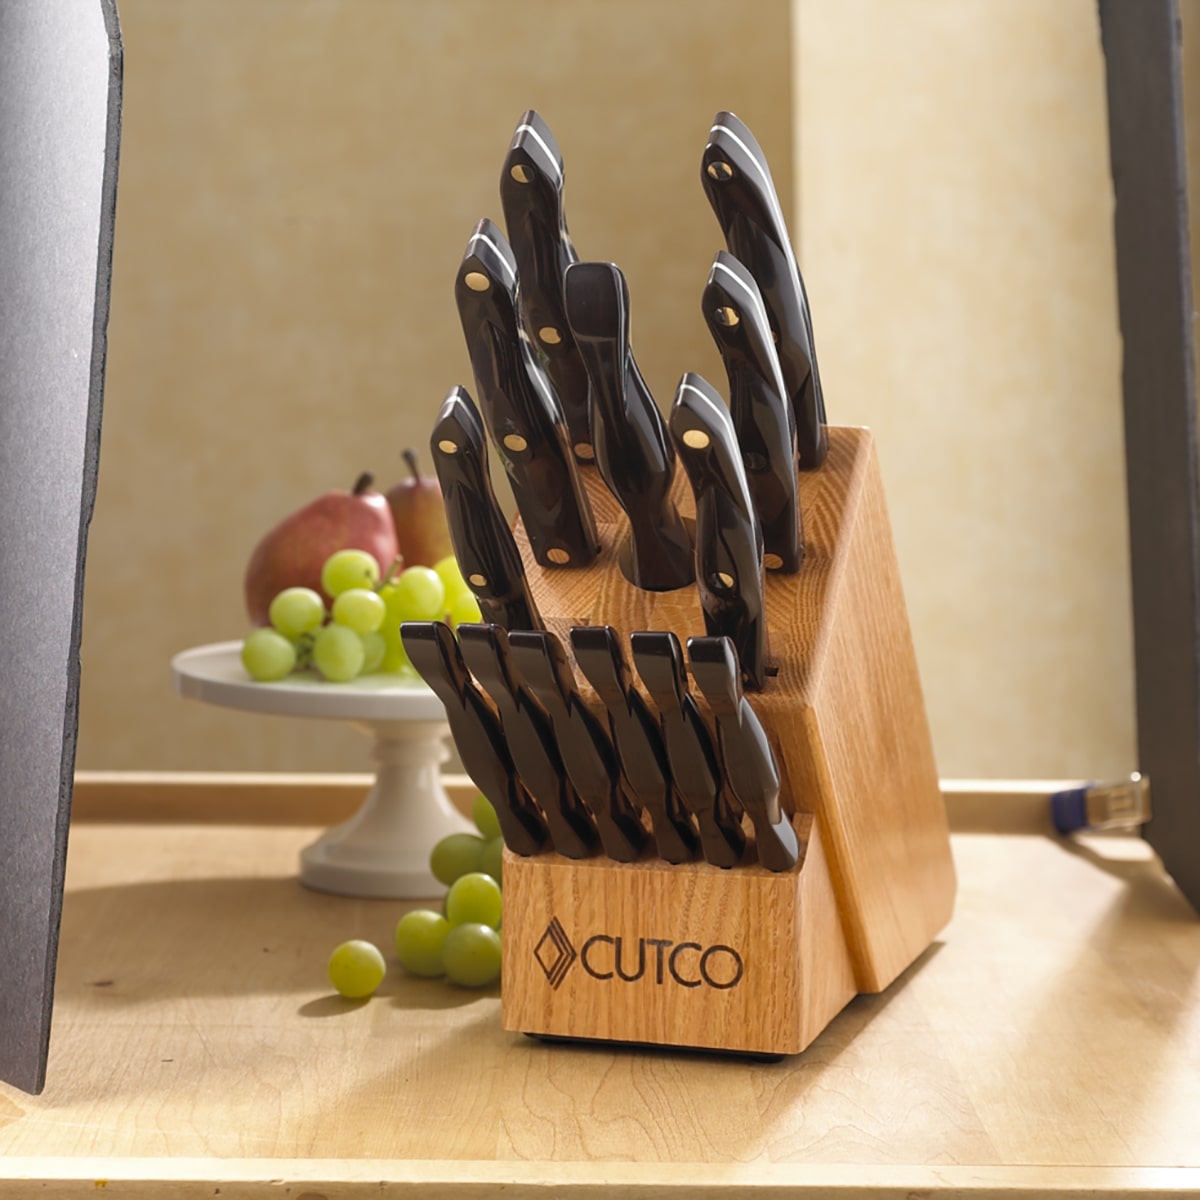  Cutco #1849 Culinary Companions Boxed Knife Gift Set - Includes  #1766 Santoku Knife and #1768 Spatula Spreader - Classic Black: Home &  Kitchen